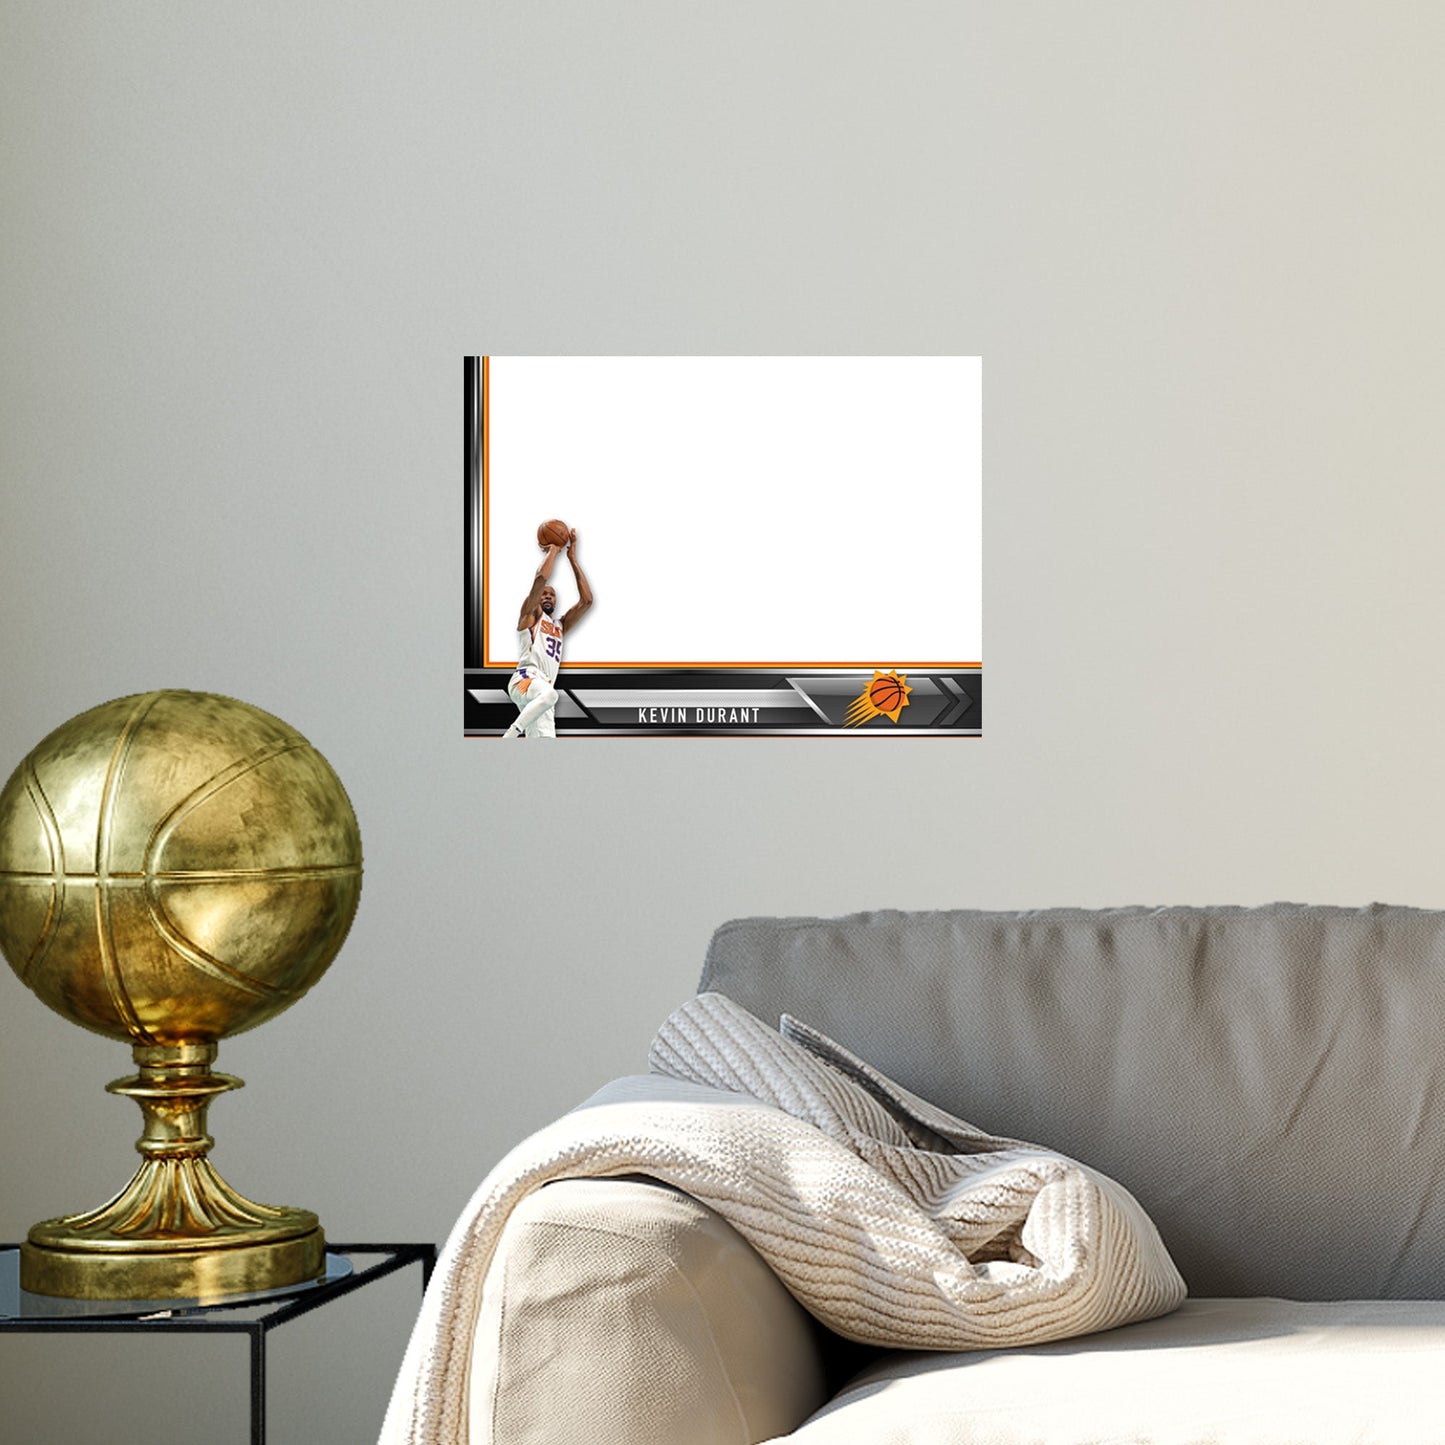 Phoenix Suns: Kevin Durant Dry Erase Whiteboard - Officially Licensed NBA Removable Adhesive Decal